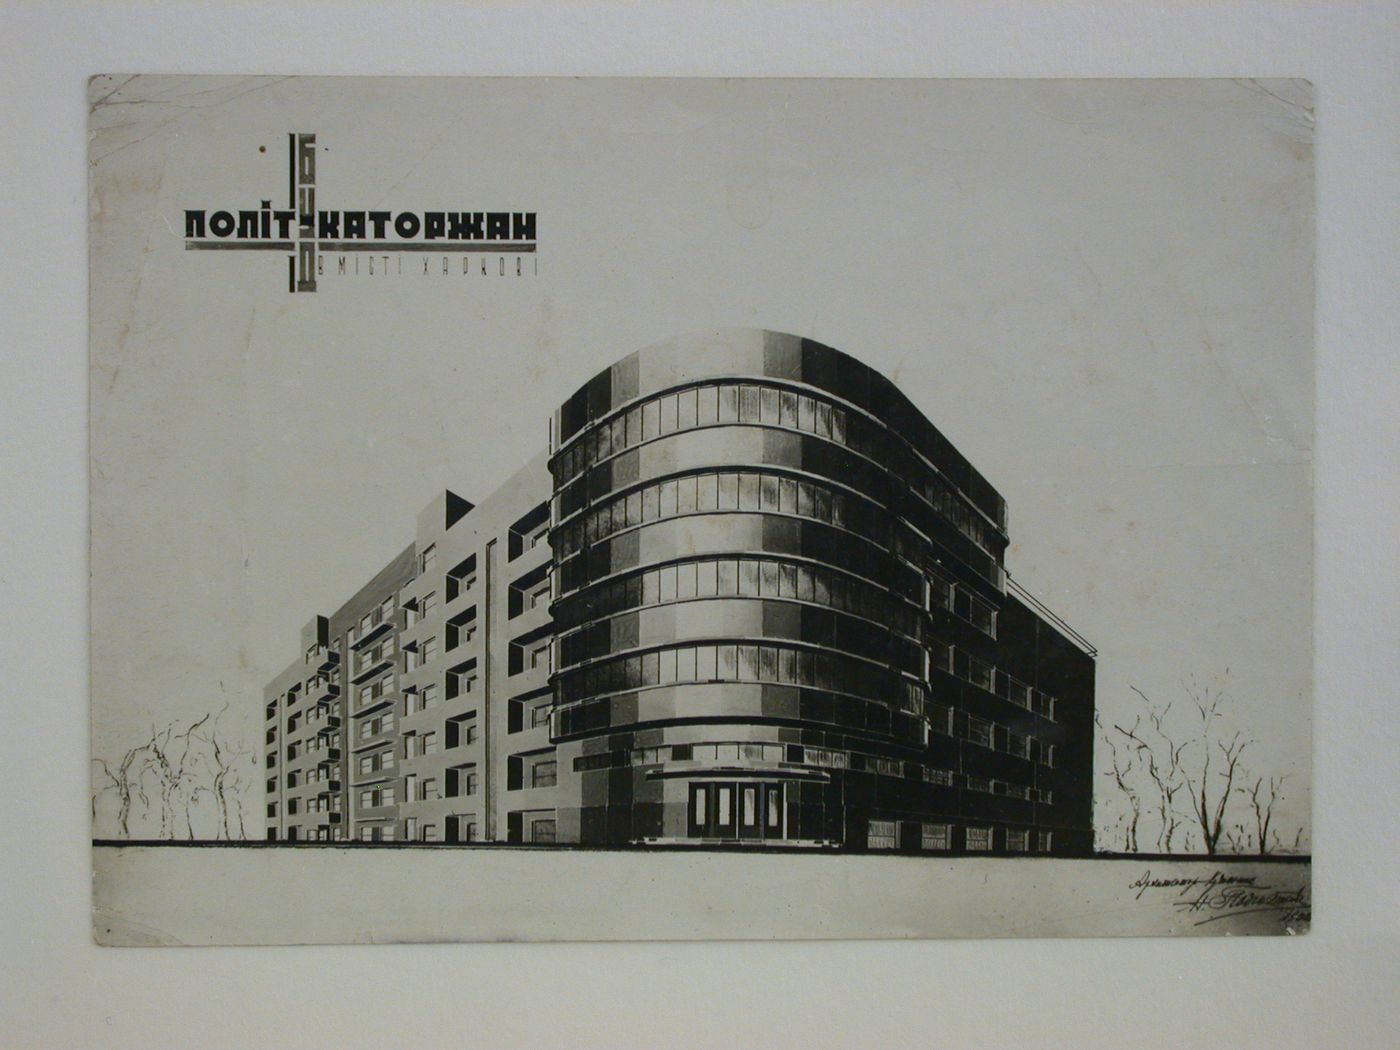 Photograph of a perspective drawing for the House of Political Prisoners of Tsarism, Kharkov, Soviet Union (now in Ukraine)